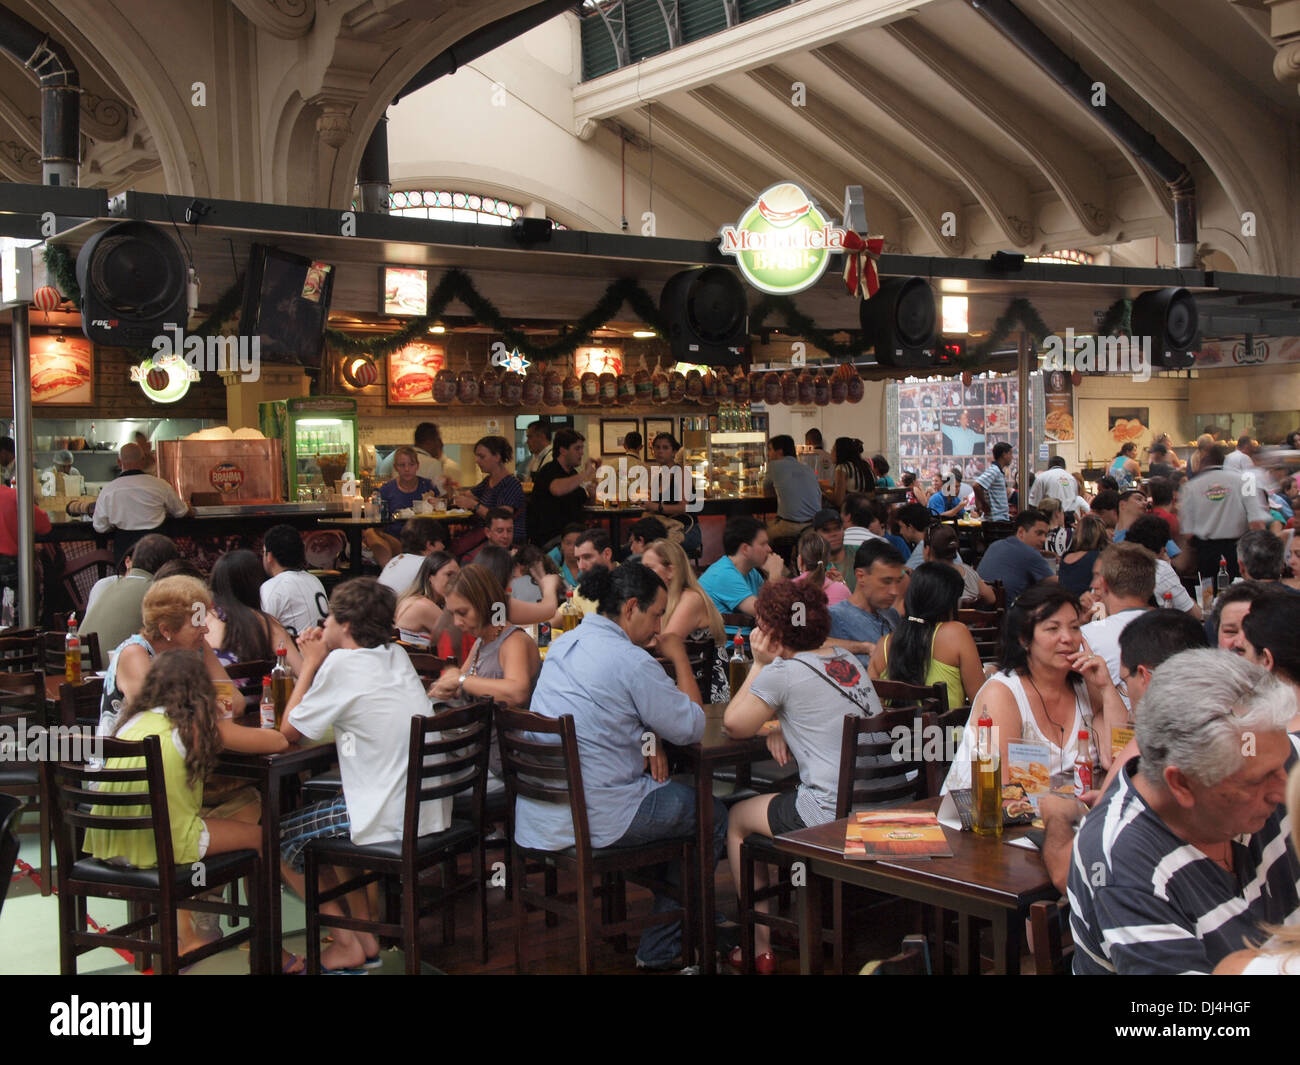 Brazilians relax in the cafe inside the CEASA food market in Sao Paulo Stock Photo